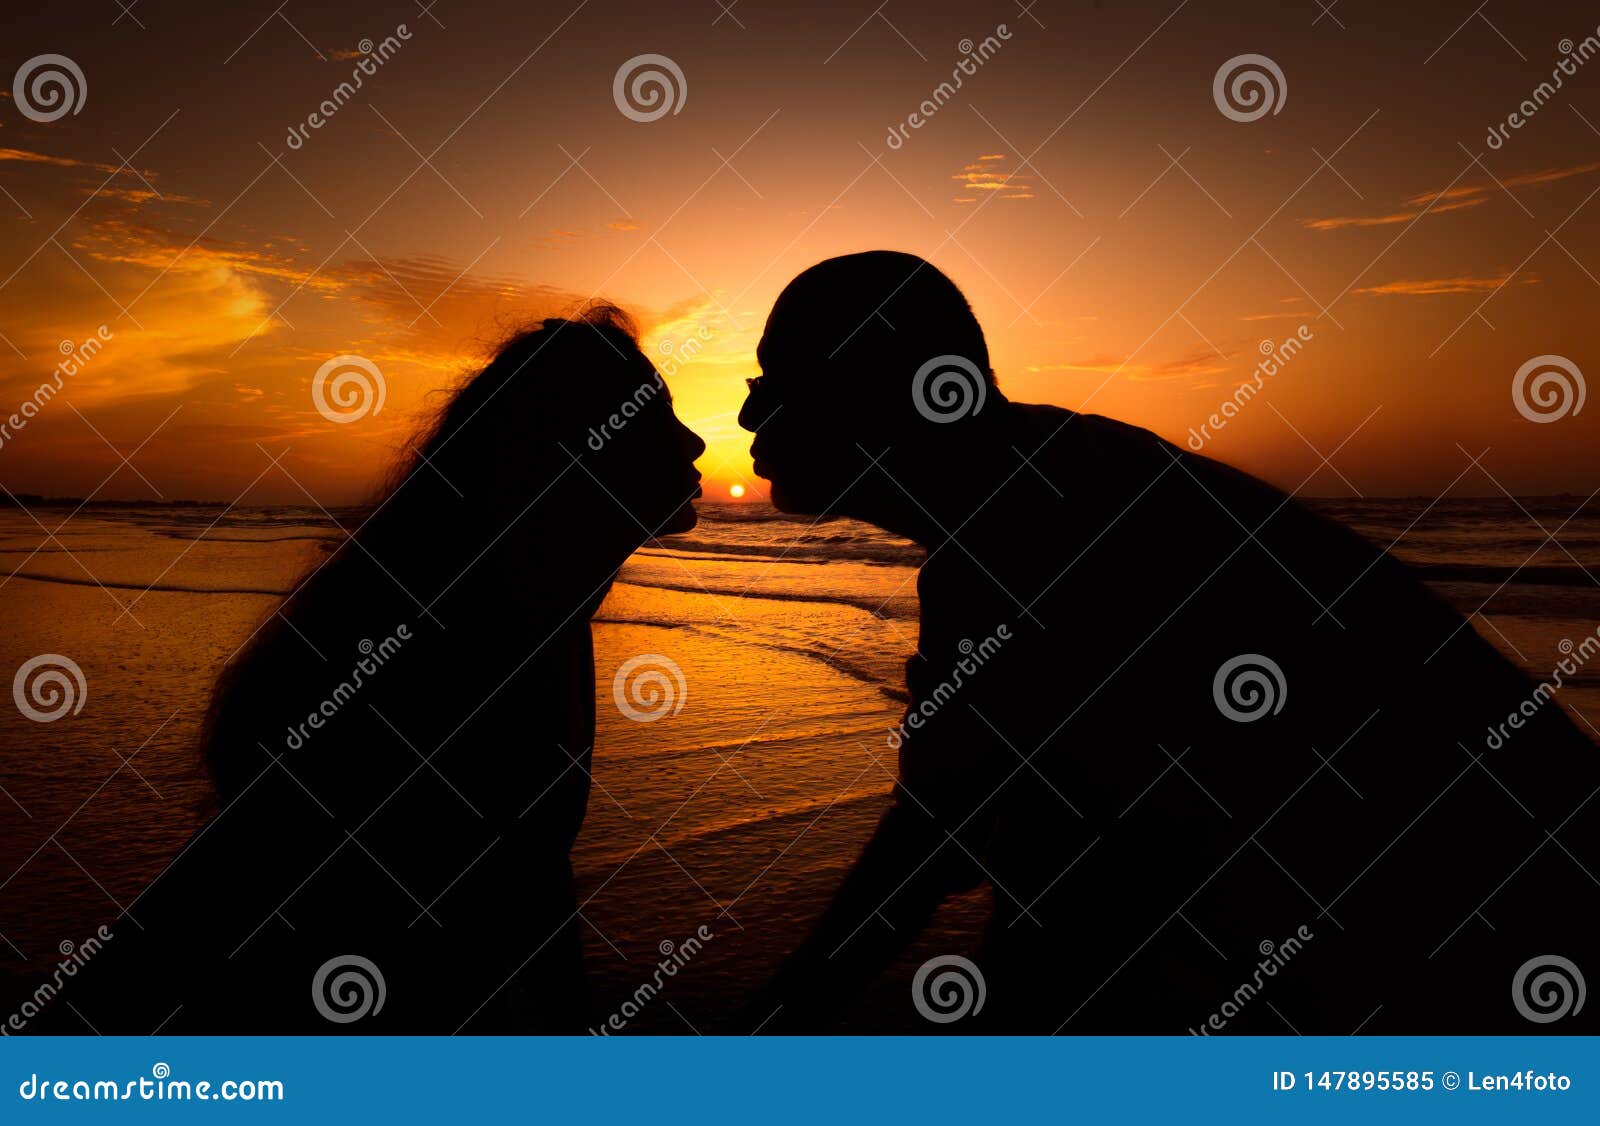 Silhouette Couple Kissing Over Sunset Background Stock Image Image Of Woman Summer 147895585